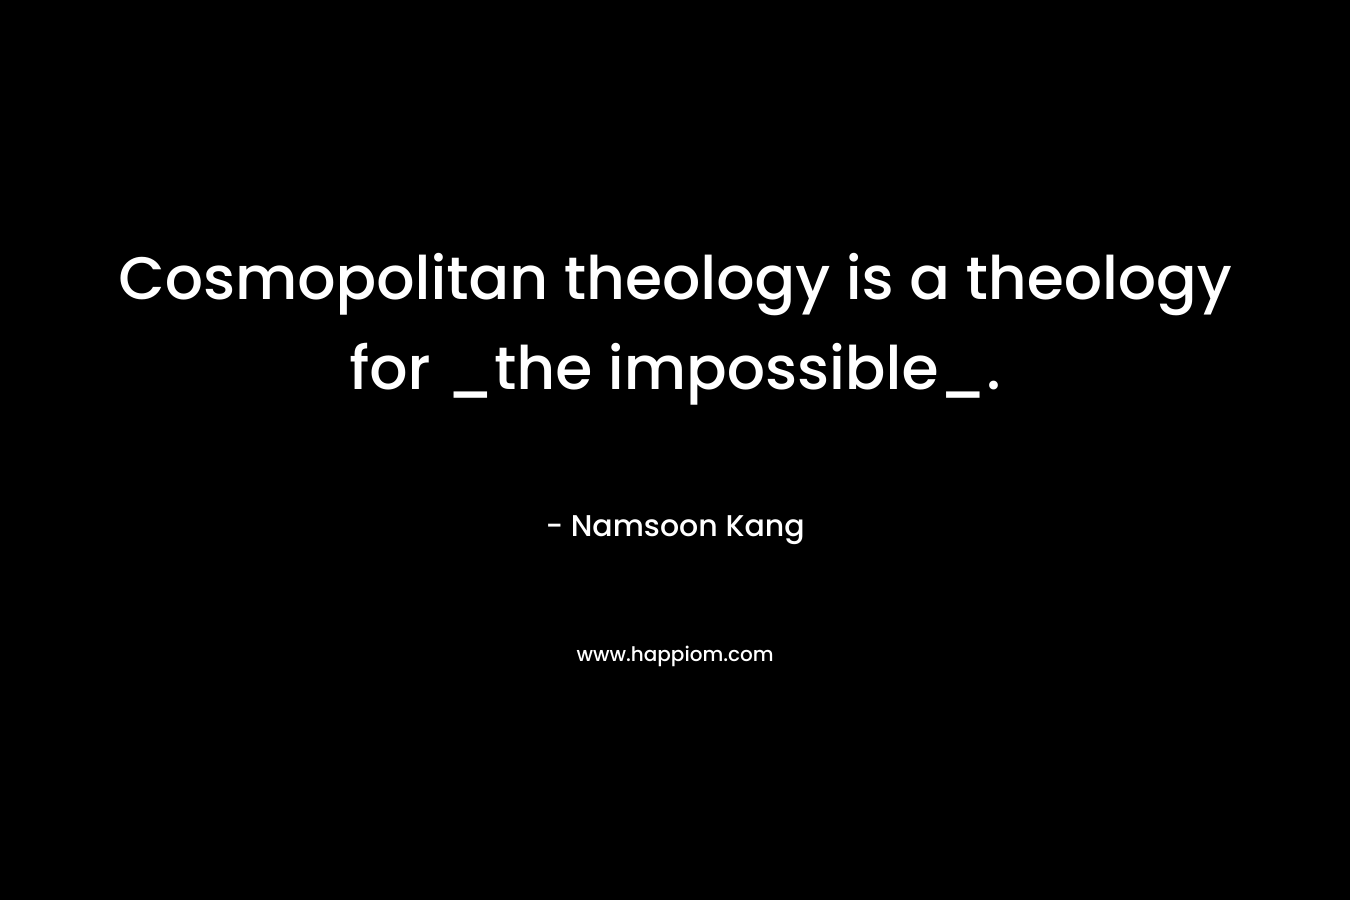 Cosmopolitan theology is a theology for _the impossible_.